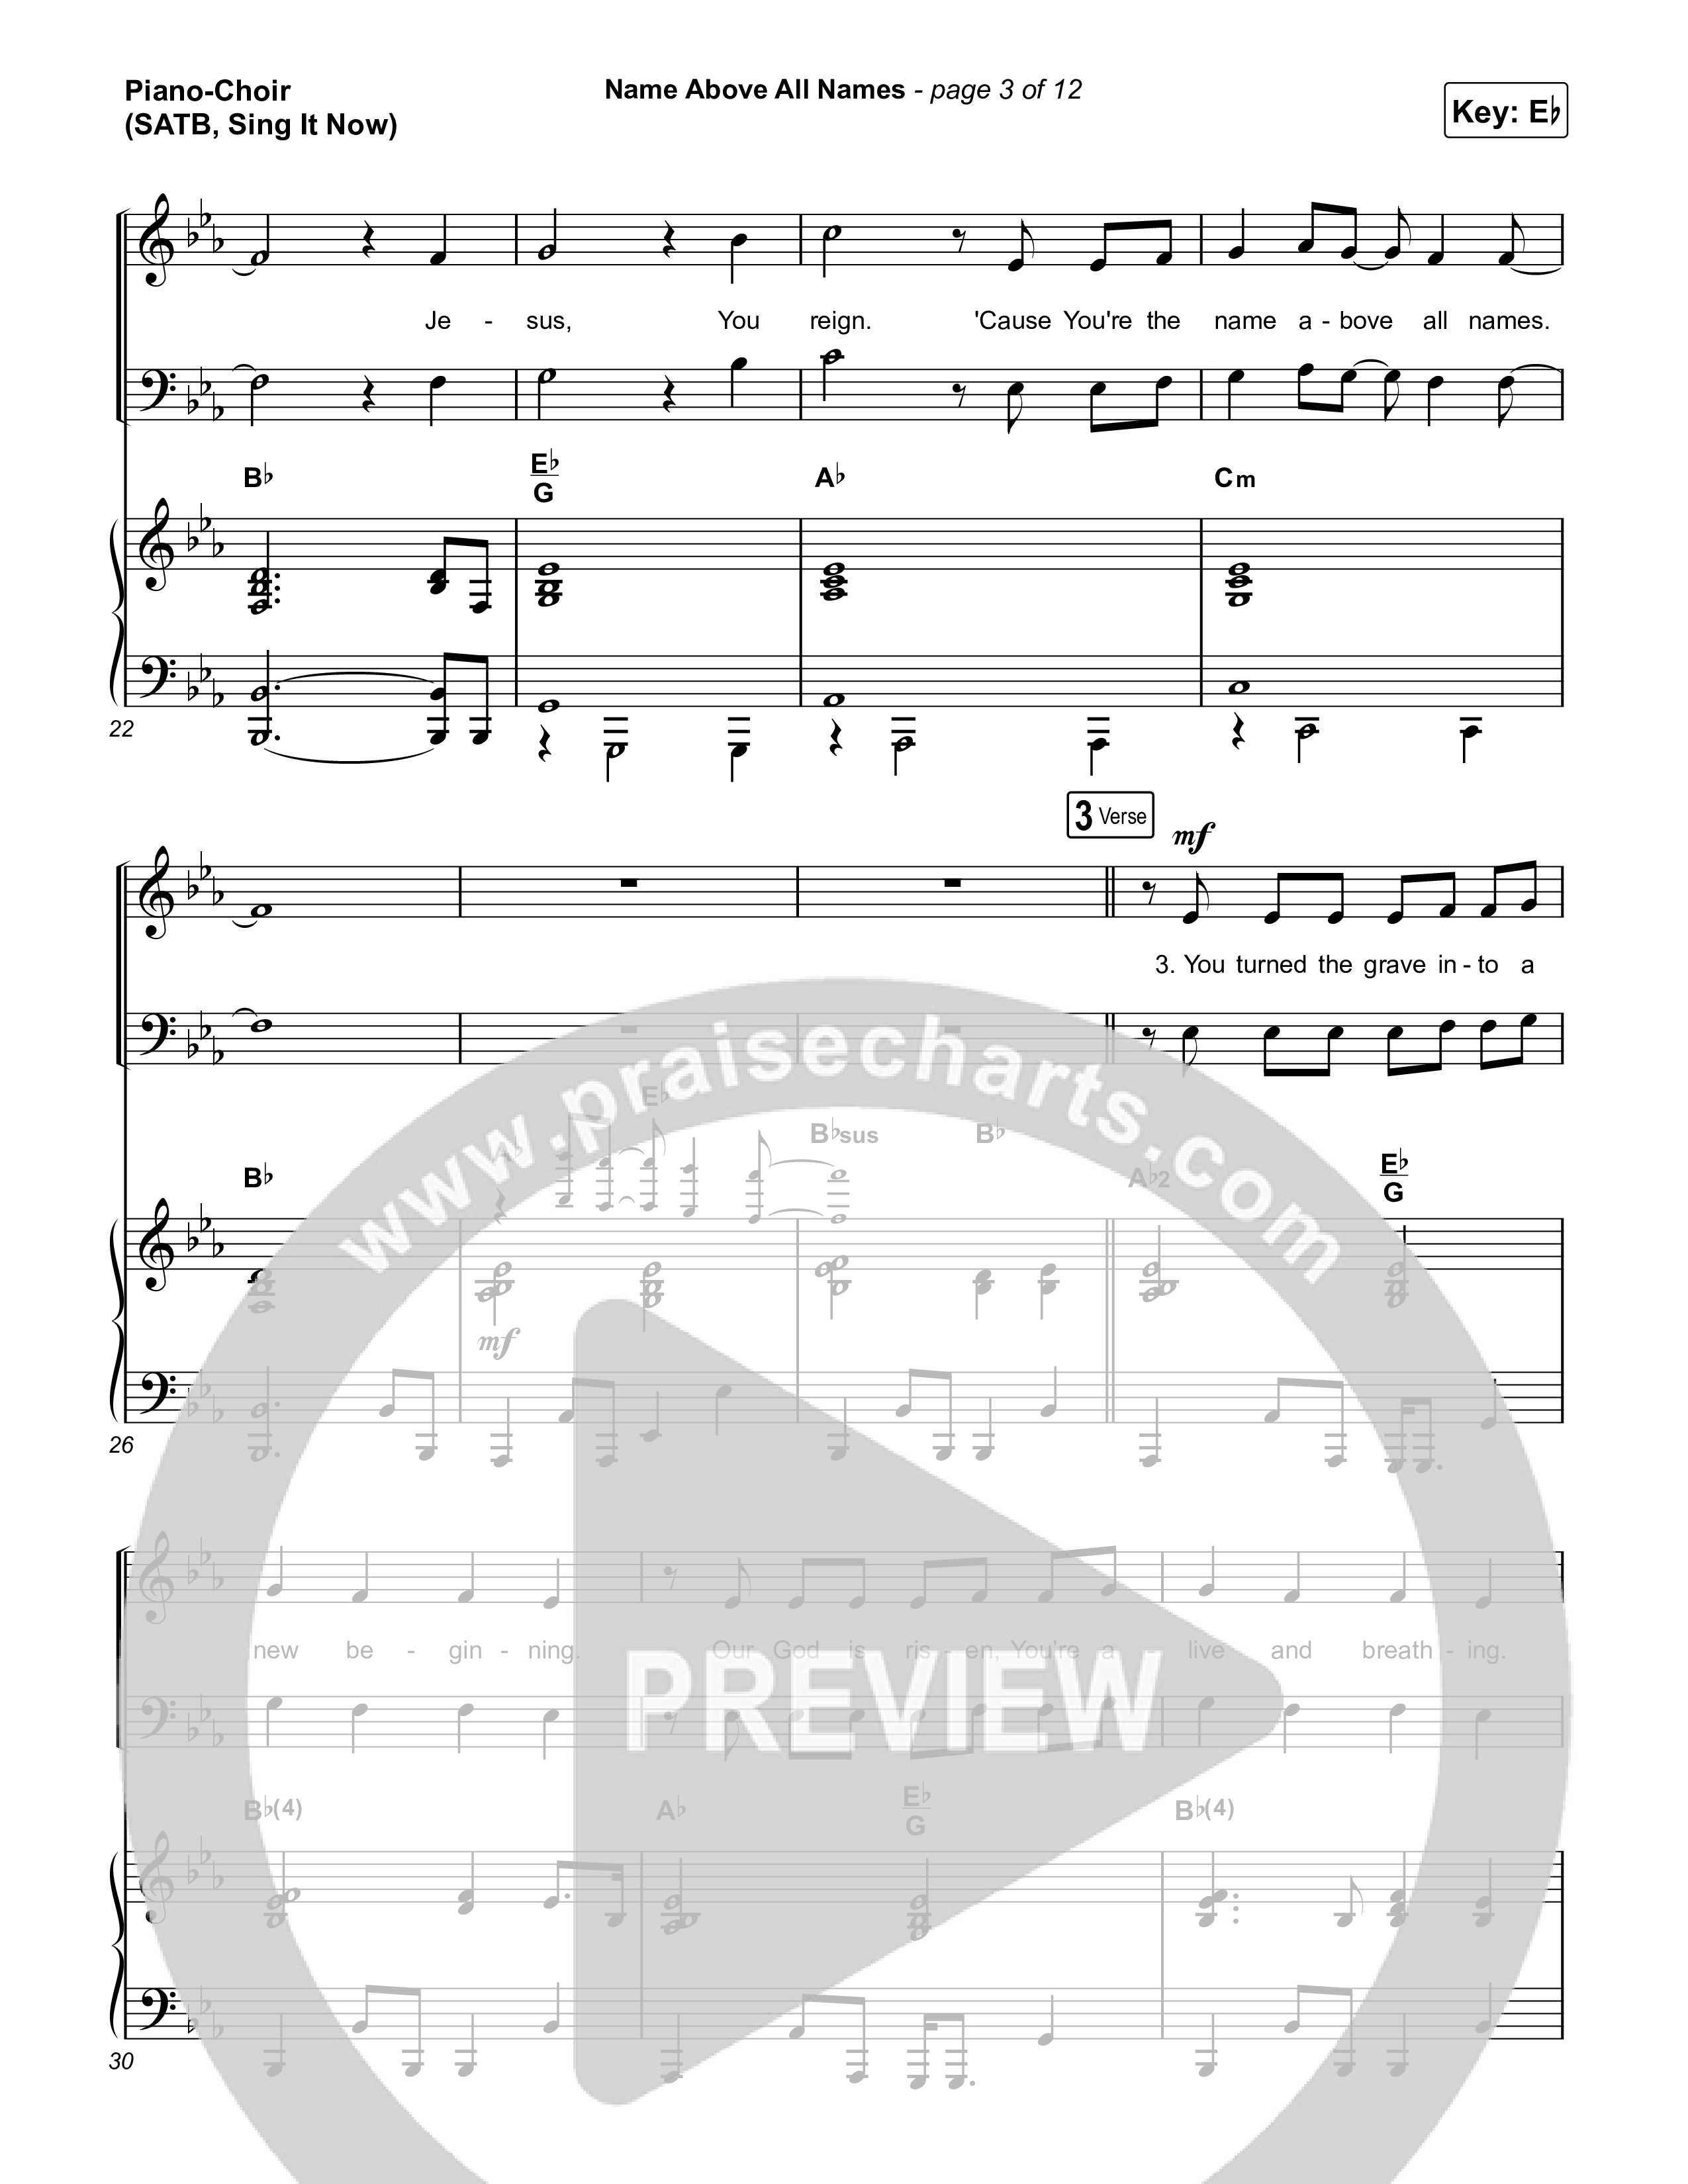 Name Above All Names (Sing It Now) Piano/Choir (SATB) (Charity Gayle / Arr. Luke Gambill)